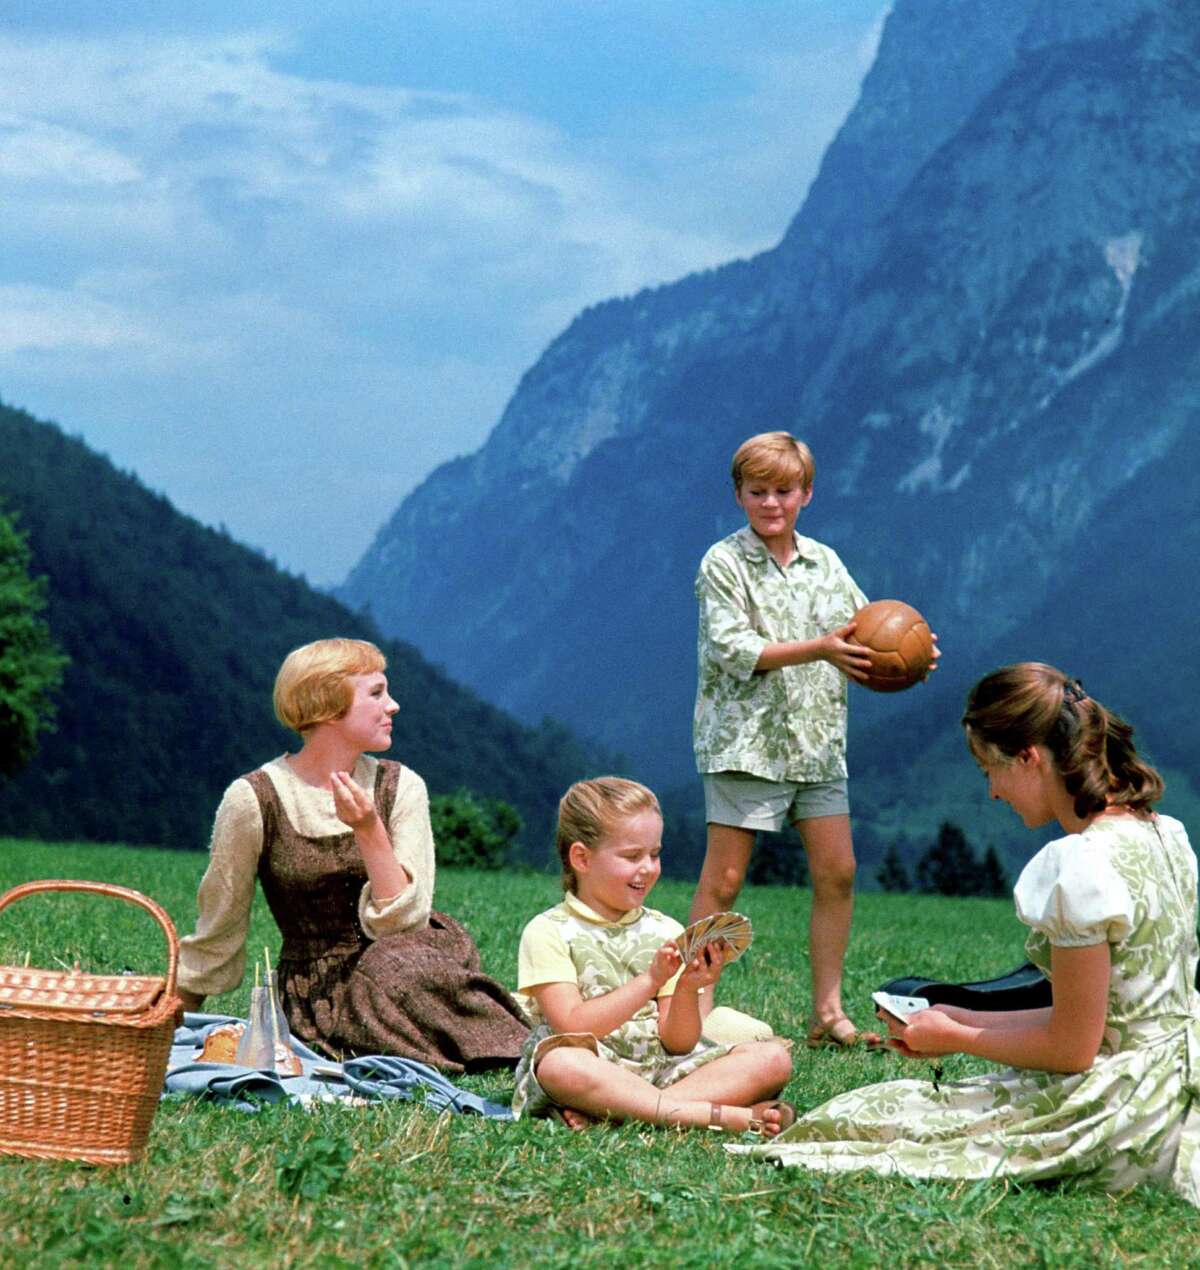 Maria (Julie Andrews, left), Gretl (Kym Karath), Kurt (Duane Chase) and Liesl (Charmian Carr) sing “Do-Re-Mi” in “The Sound of Music,” a movie that evokes a simpler time but was released in 1965, a period of tumultuous change.